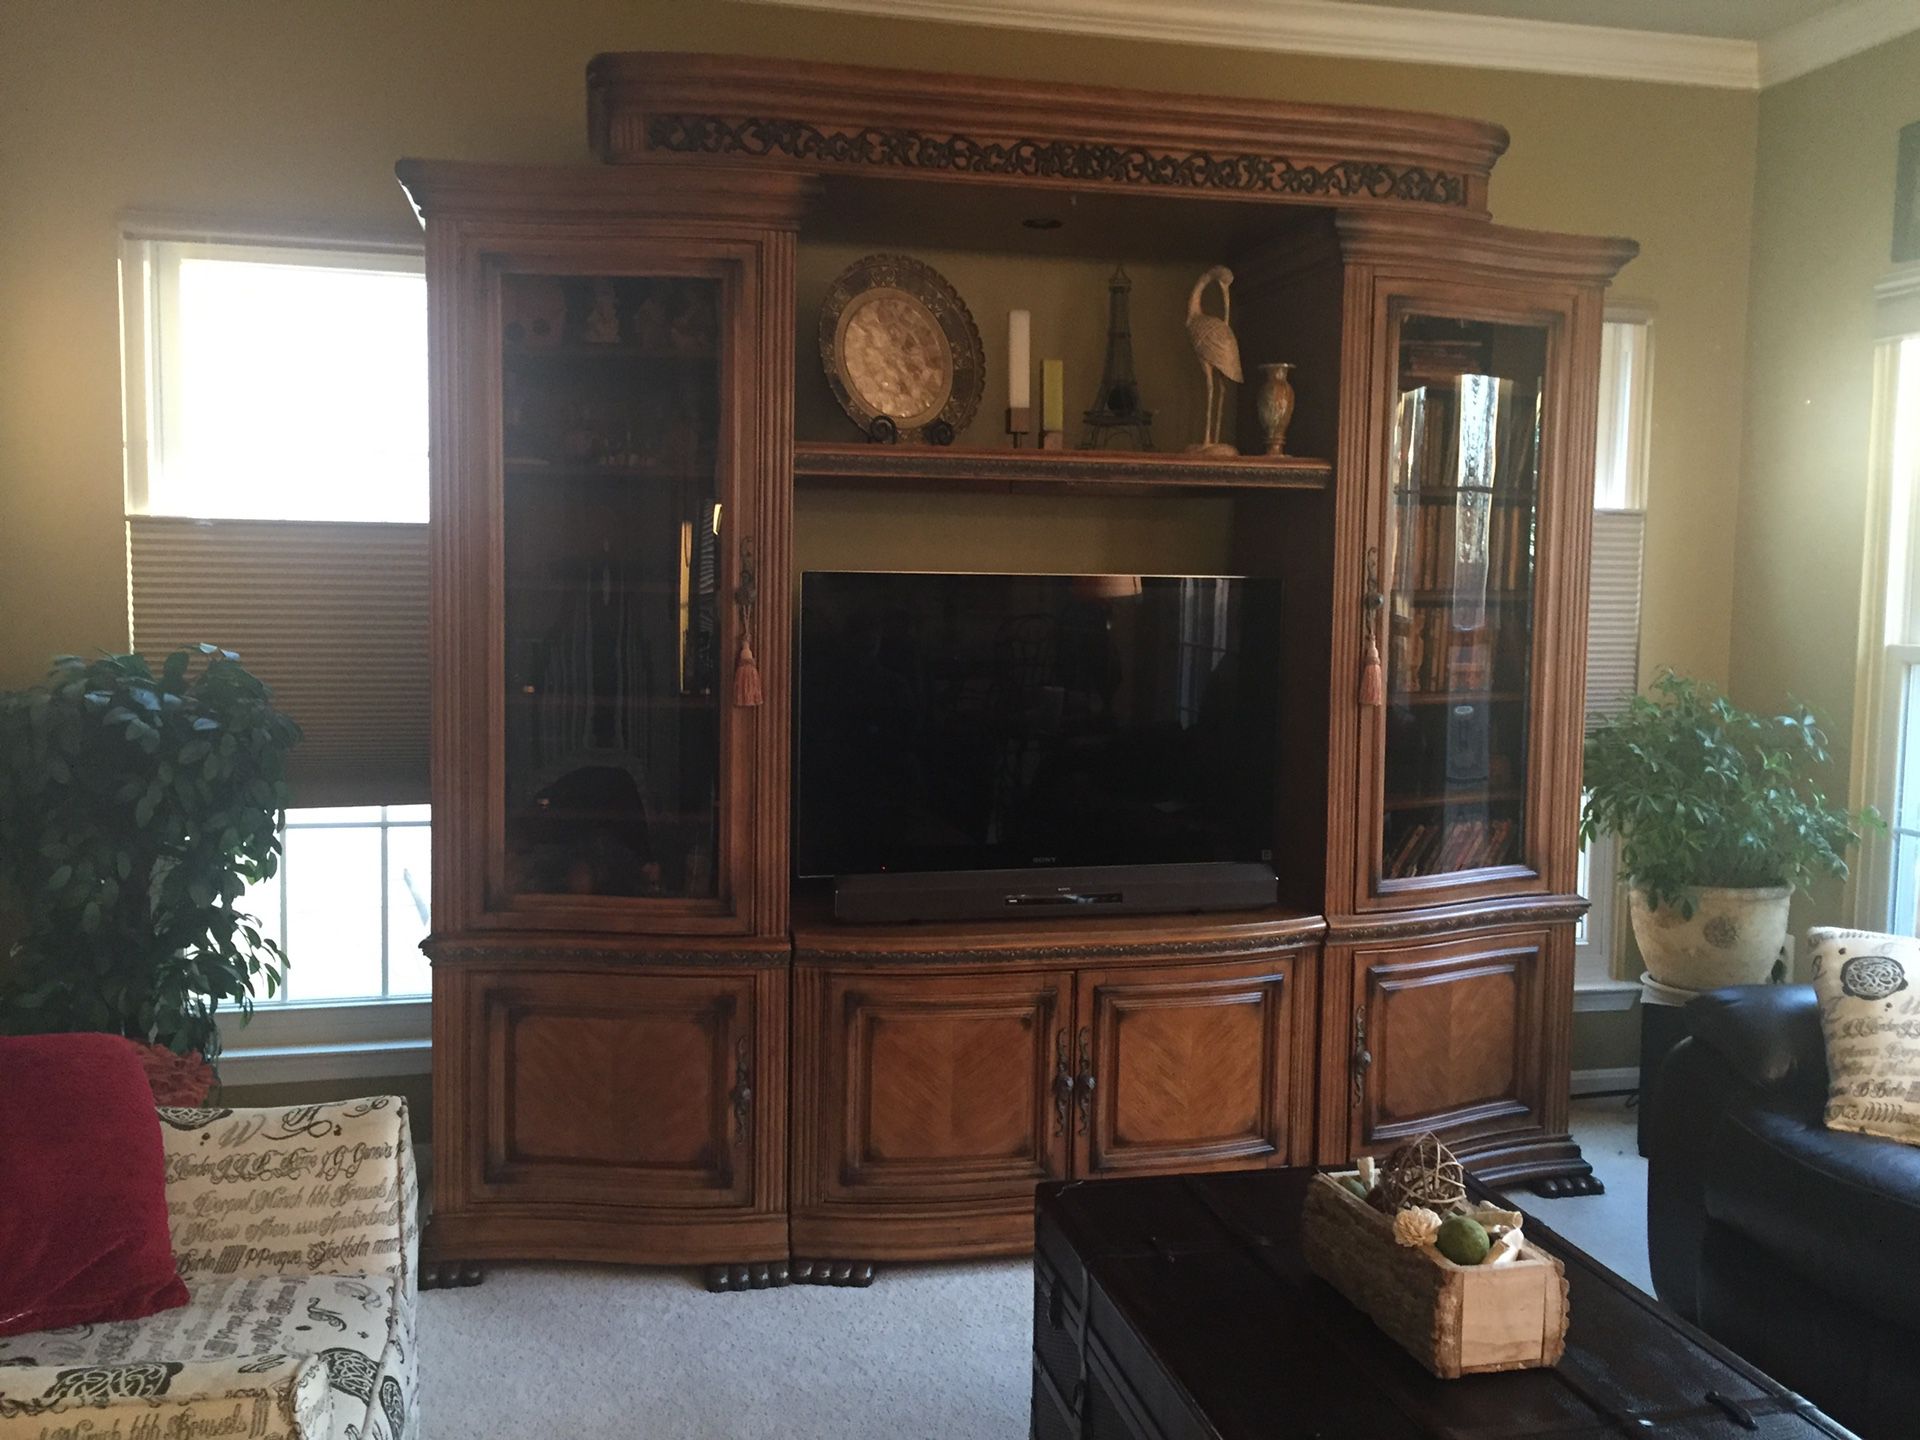 Beautiful entertainment center with curved glass cabinets. Holds a 44" television without expanding but can expand to approximately 60". Center shel